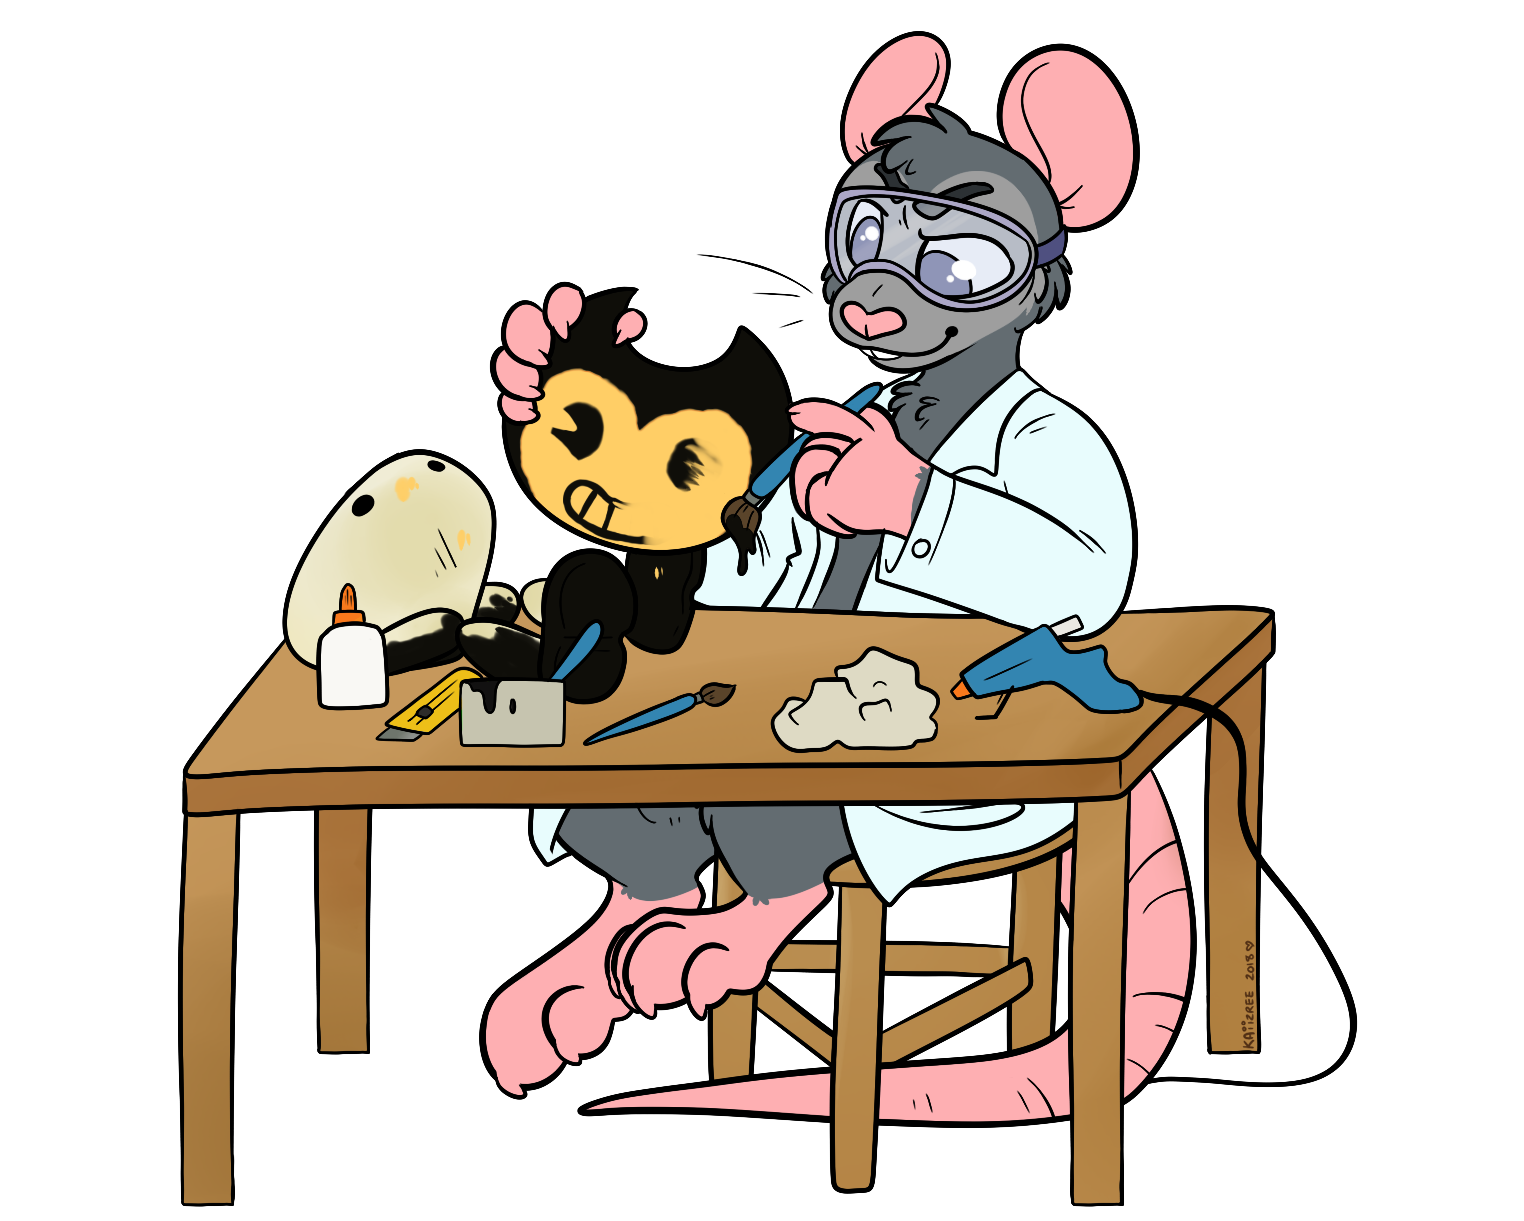 Fabrice the rat crafting a puppet Bendy from Bendy and the Ink Machine - Art by Mikey Opossum